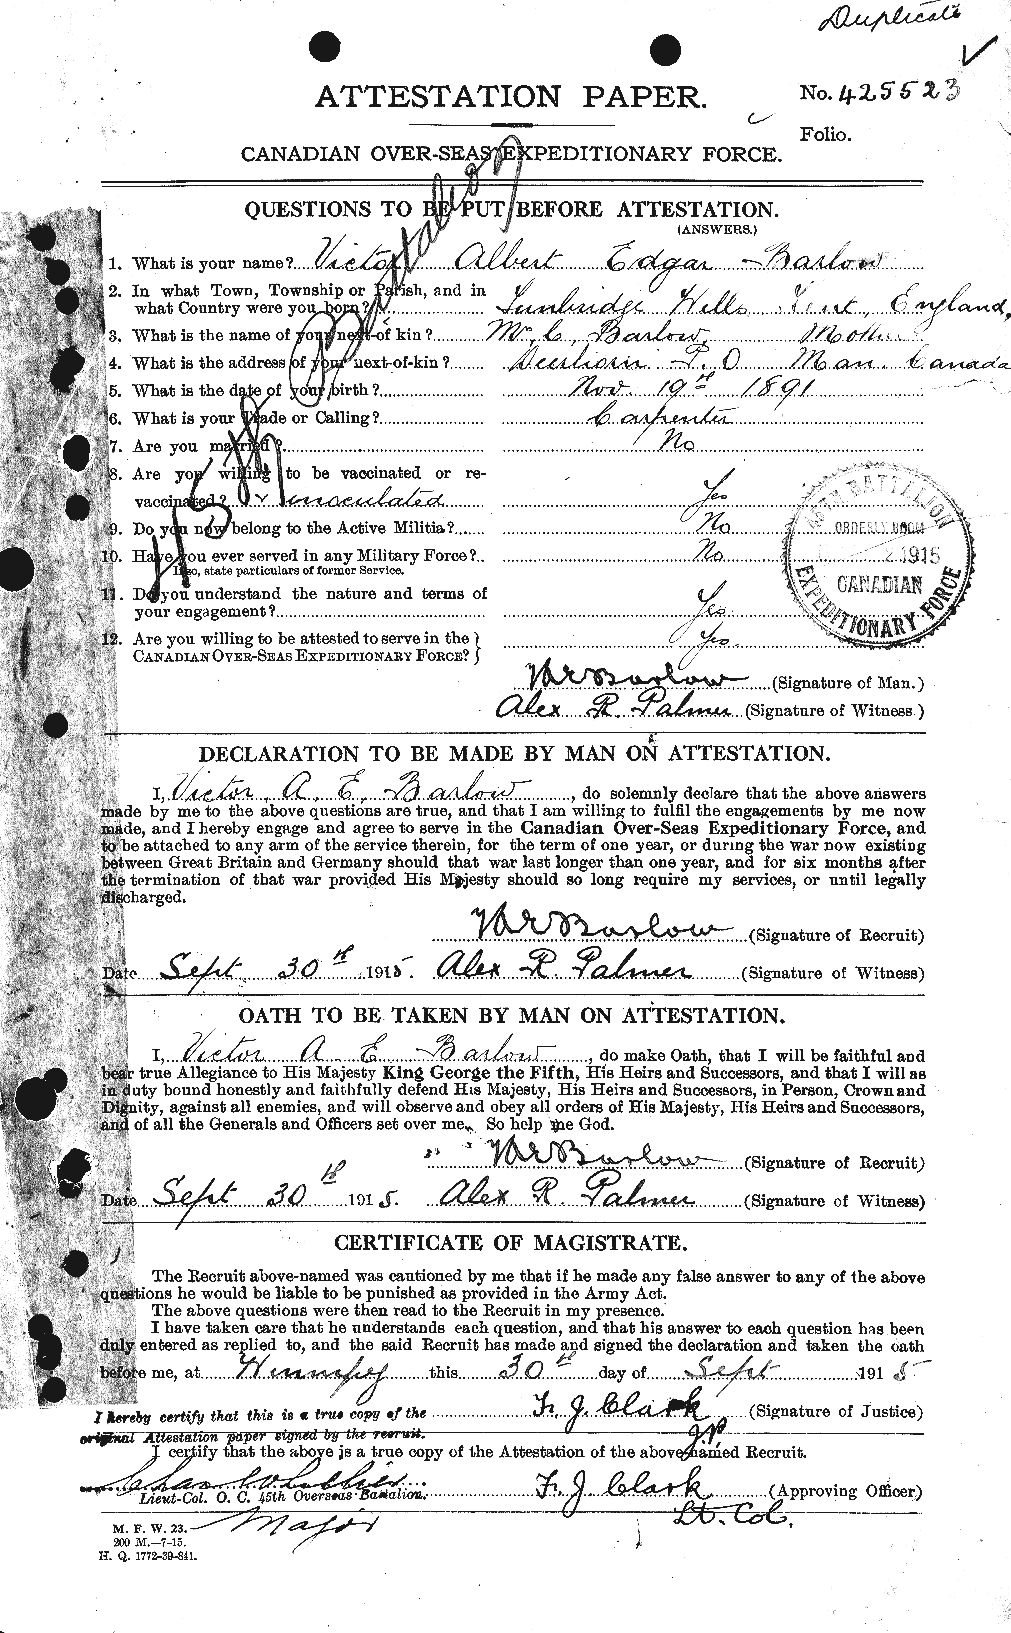 Personnel Records of the First World War - CEF 227087a